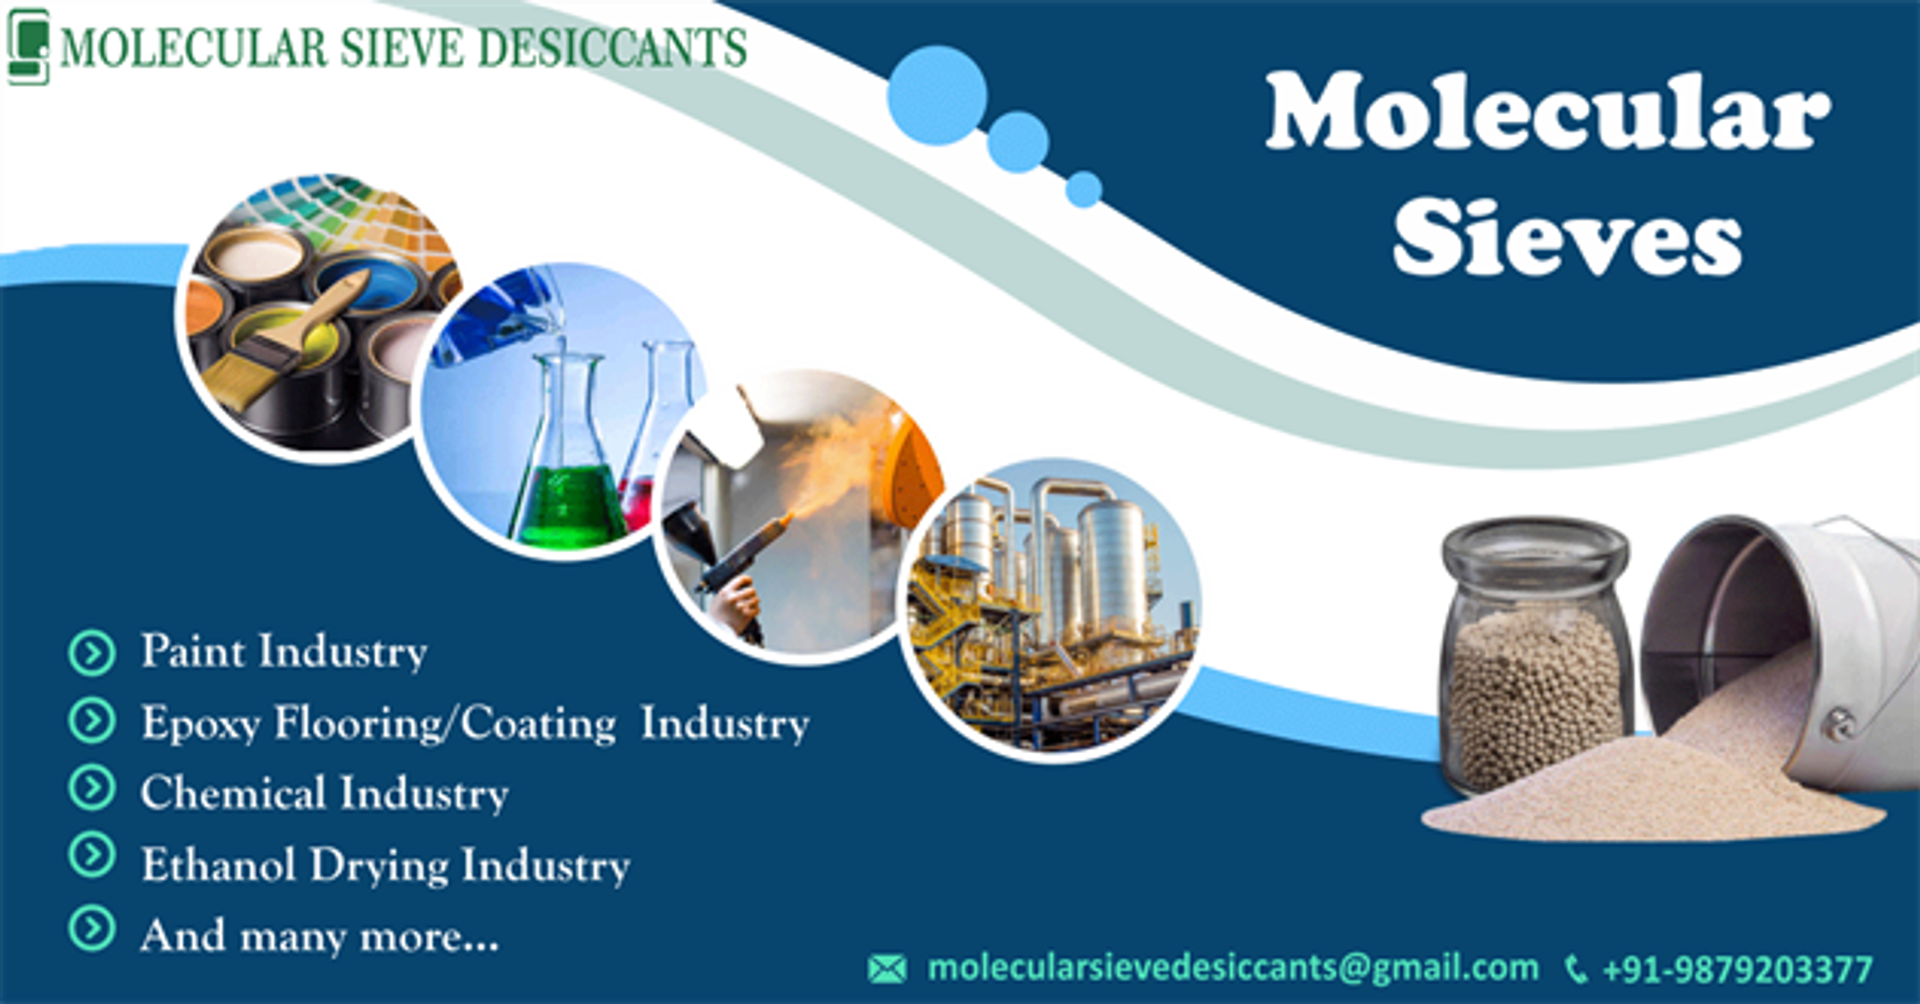 Molecular Sieves a division of Sorbead India Pvt Ltd